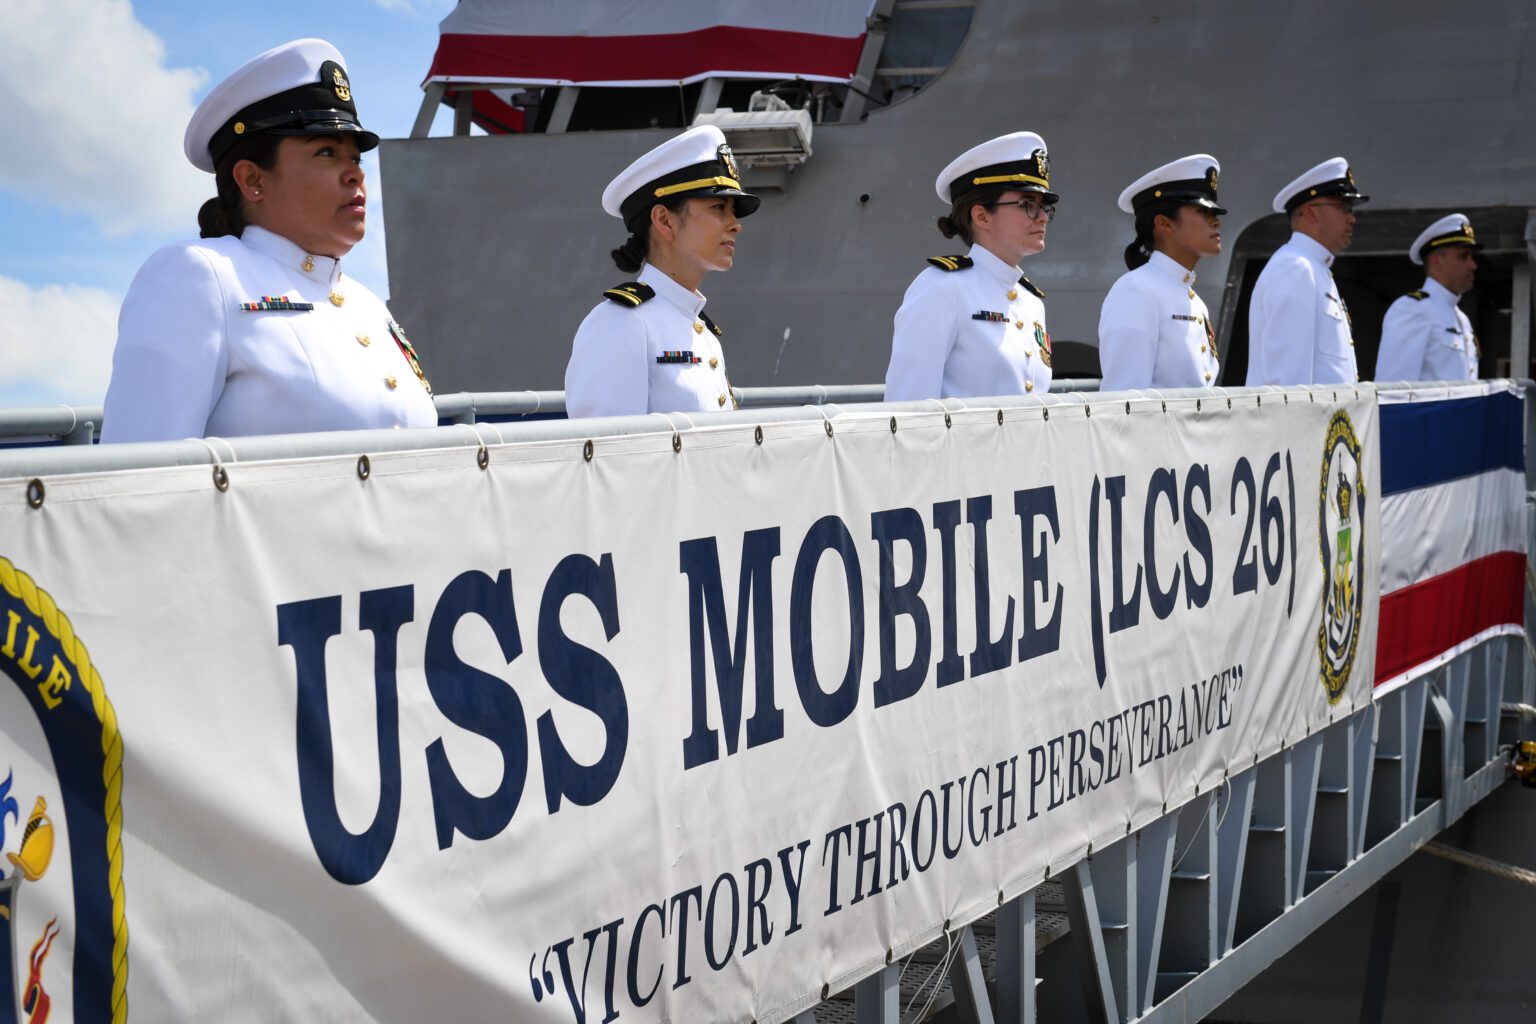 210522-N-SB299-1895

MOBILE, Ala. (May 22, 2021) – The crew of USS Mobile (LCS 26), man the ship during the commissioning ceremony of Mobile. Mobile is the Navy’s 13th Independence-variant littoral combat ship. (U.S. Navy photo by Mass Communication Specialist 2nd Class Alex Millar/Released)